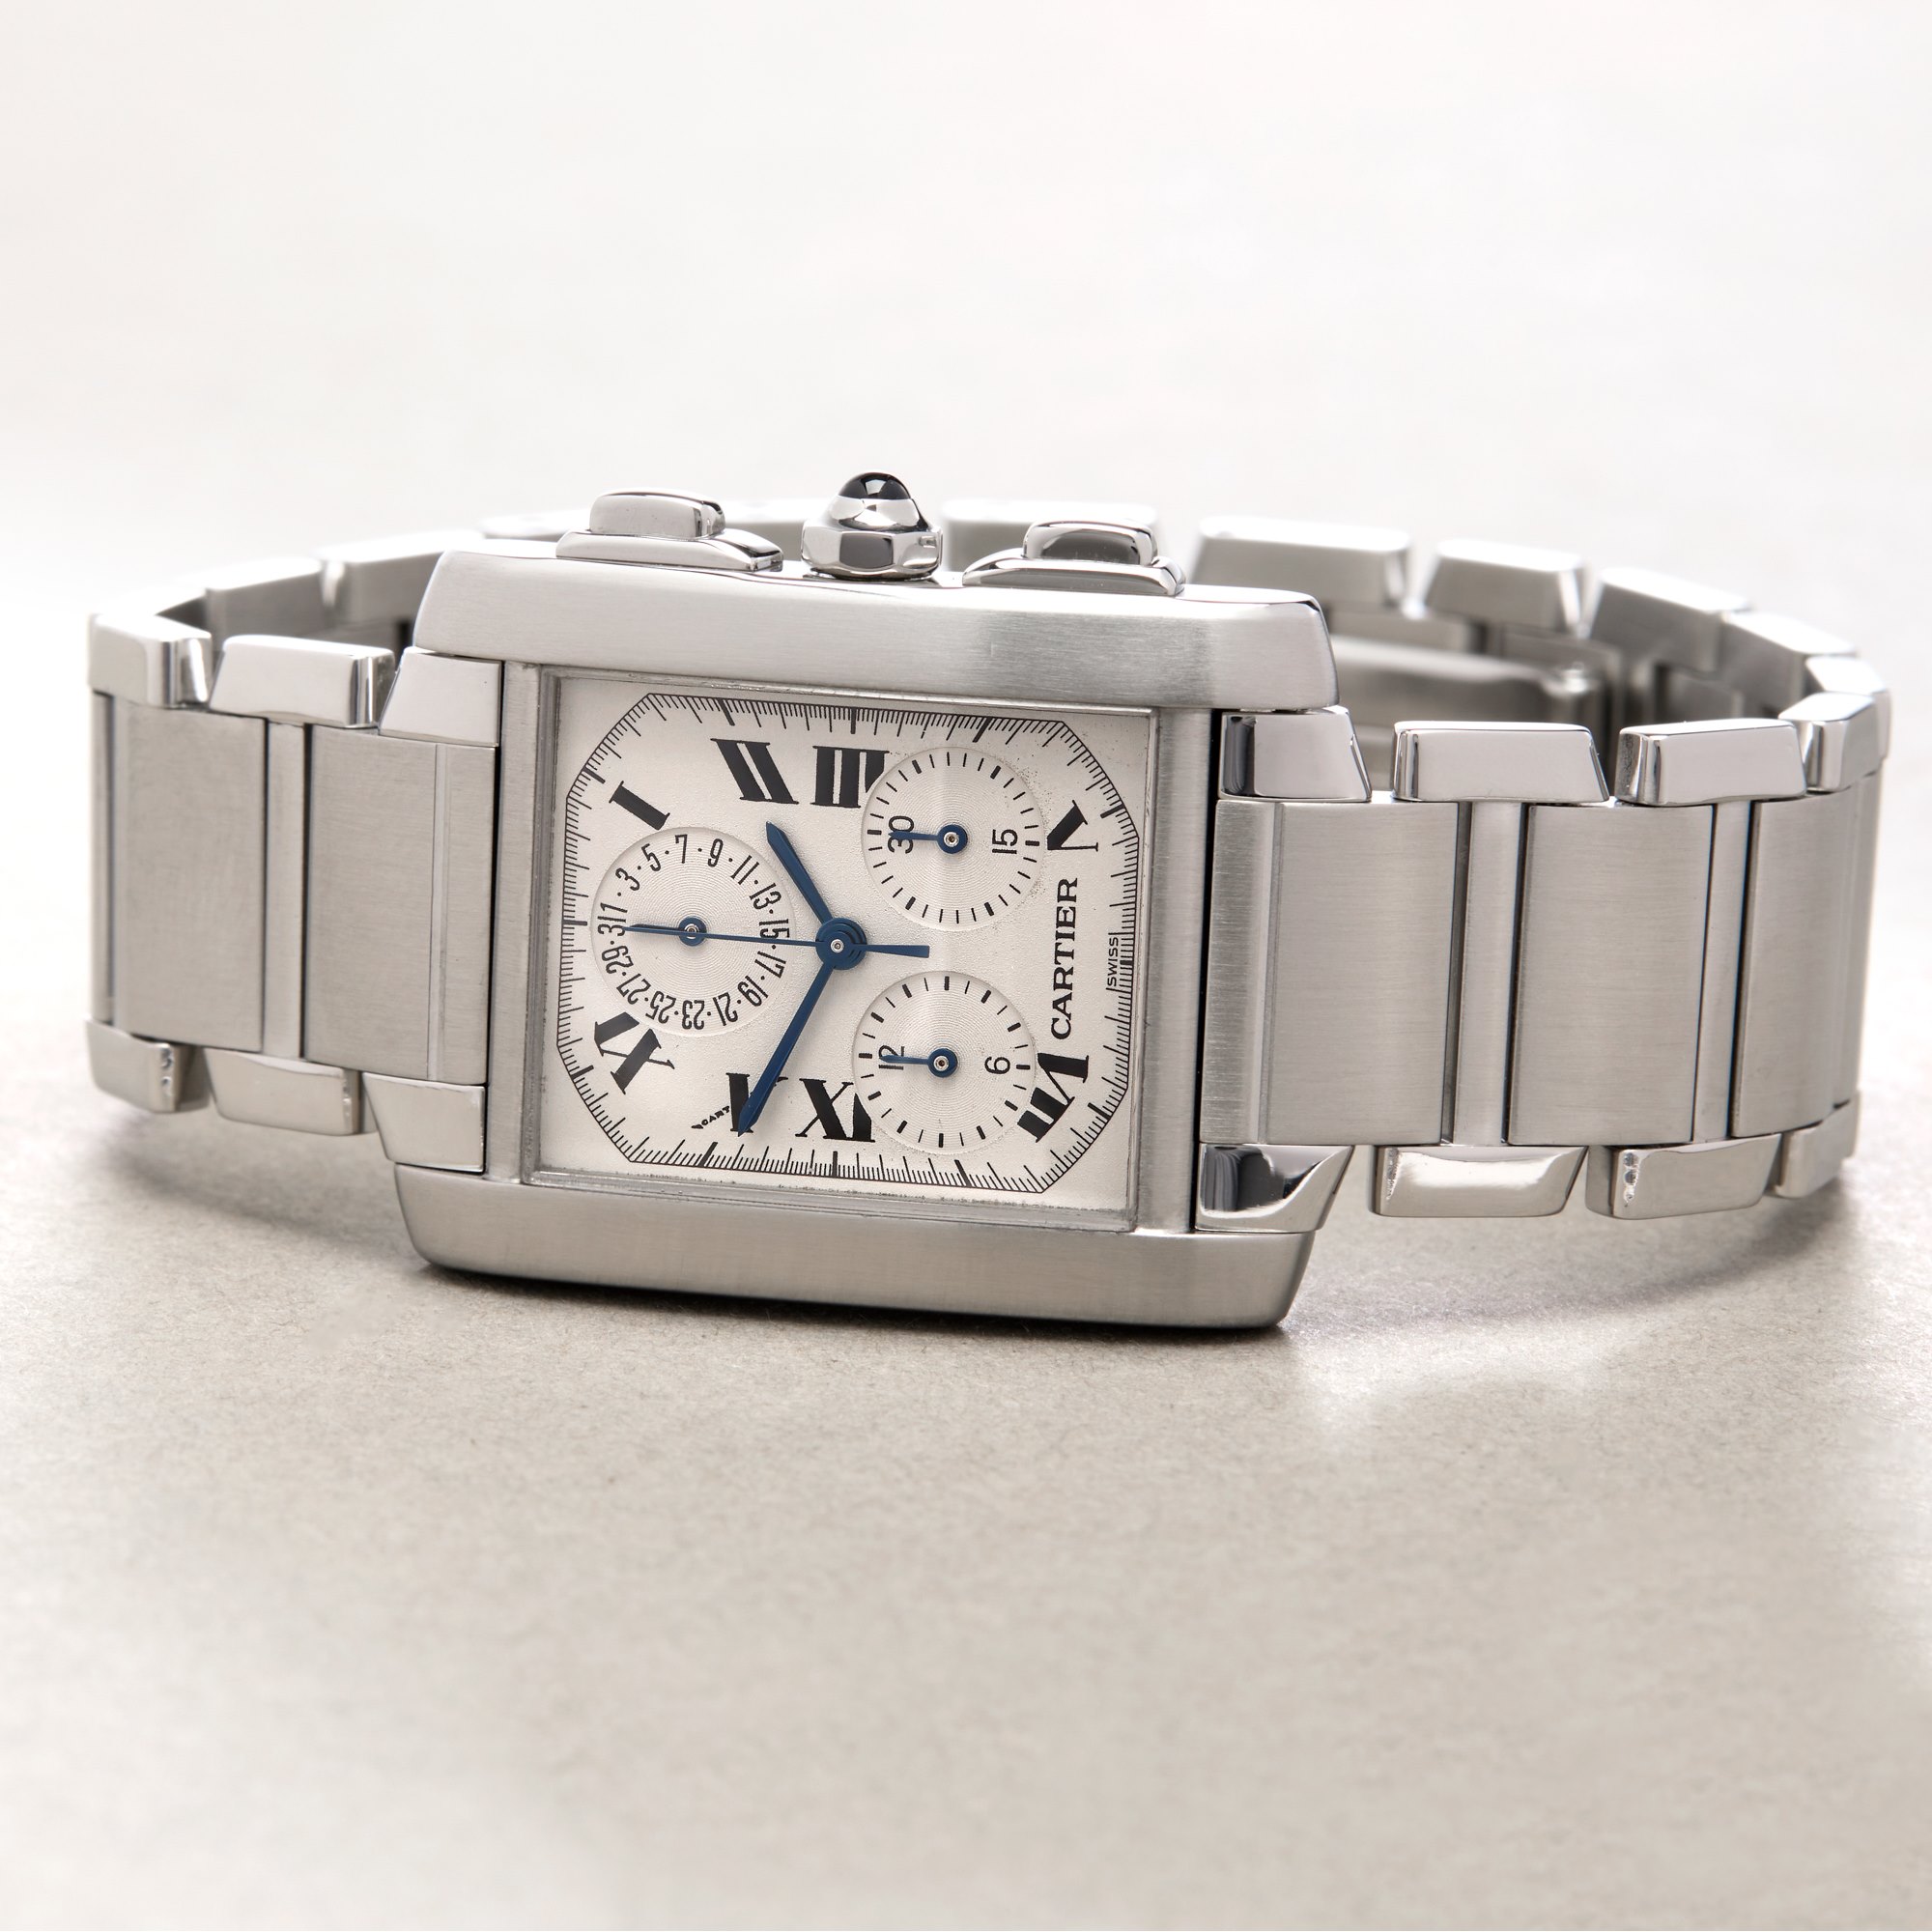 Cartier Chronoflex Stainless Steel W51001Q3 or 2303